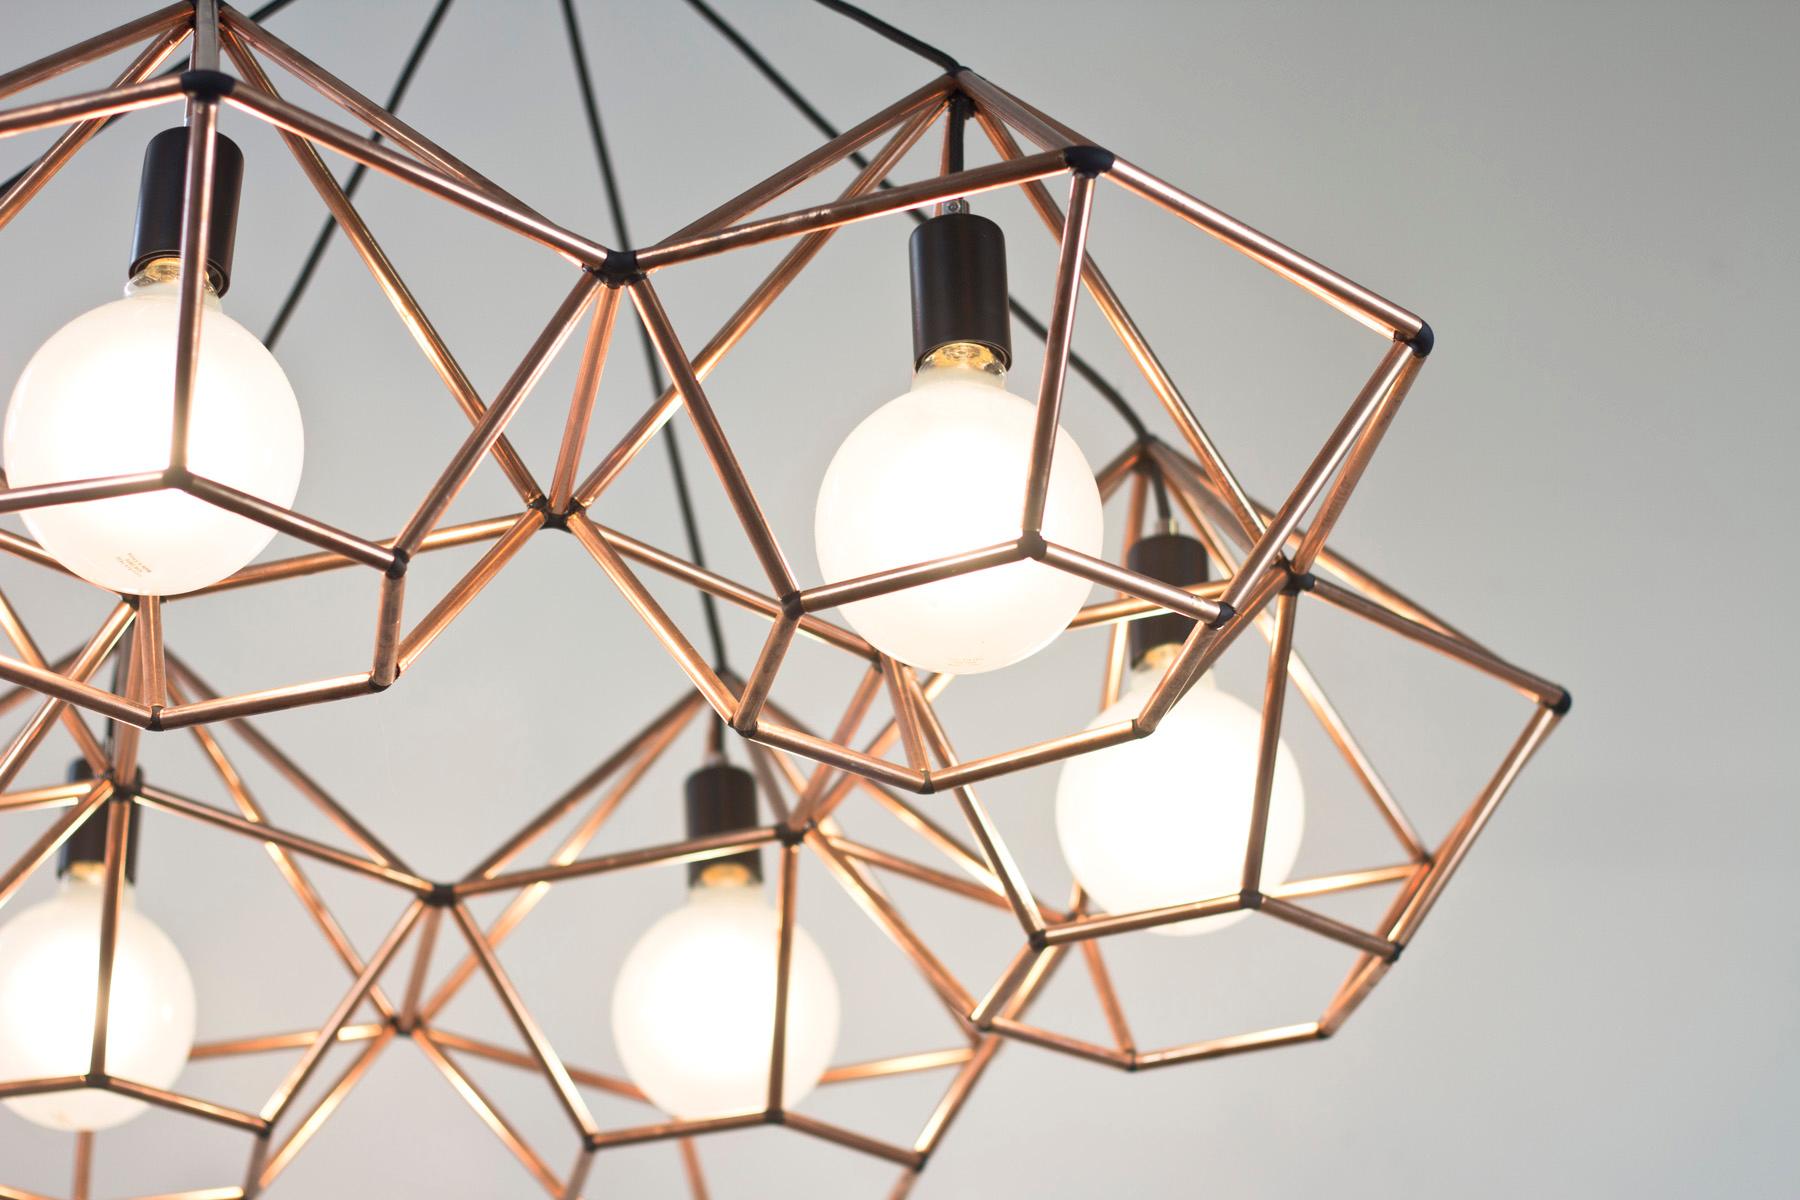 Rough diamond chandelier is a decorative fixture that combines handmade craftsmanship with digital technology. The design combines a 3D printed joining system with handcut and assembled copper or brass tube. The result is a decorative feature light